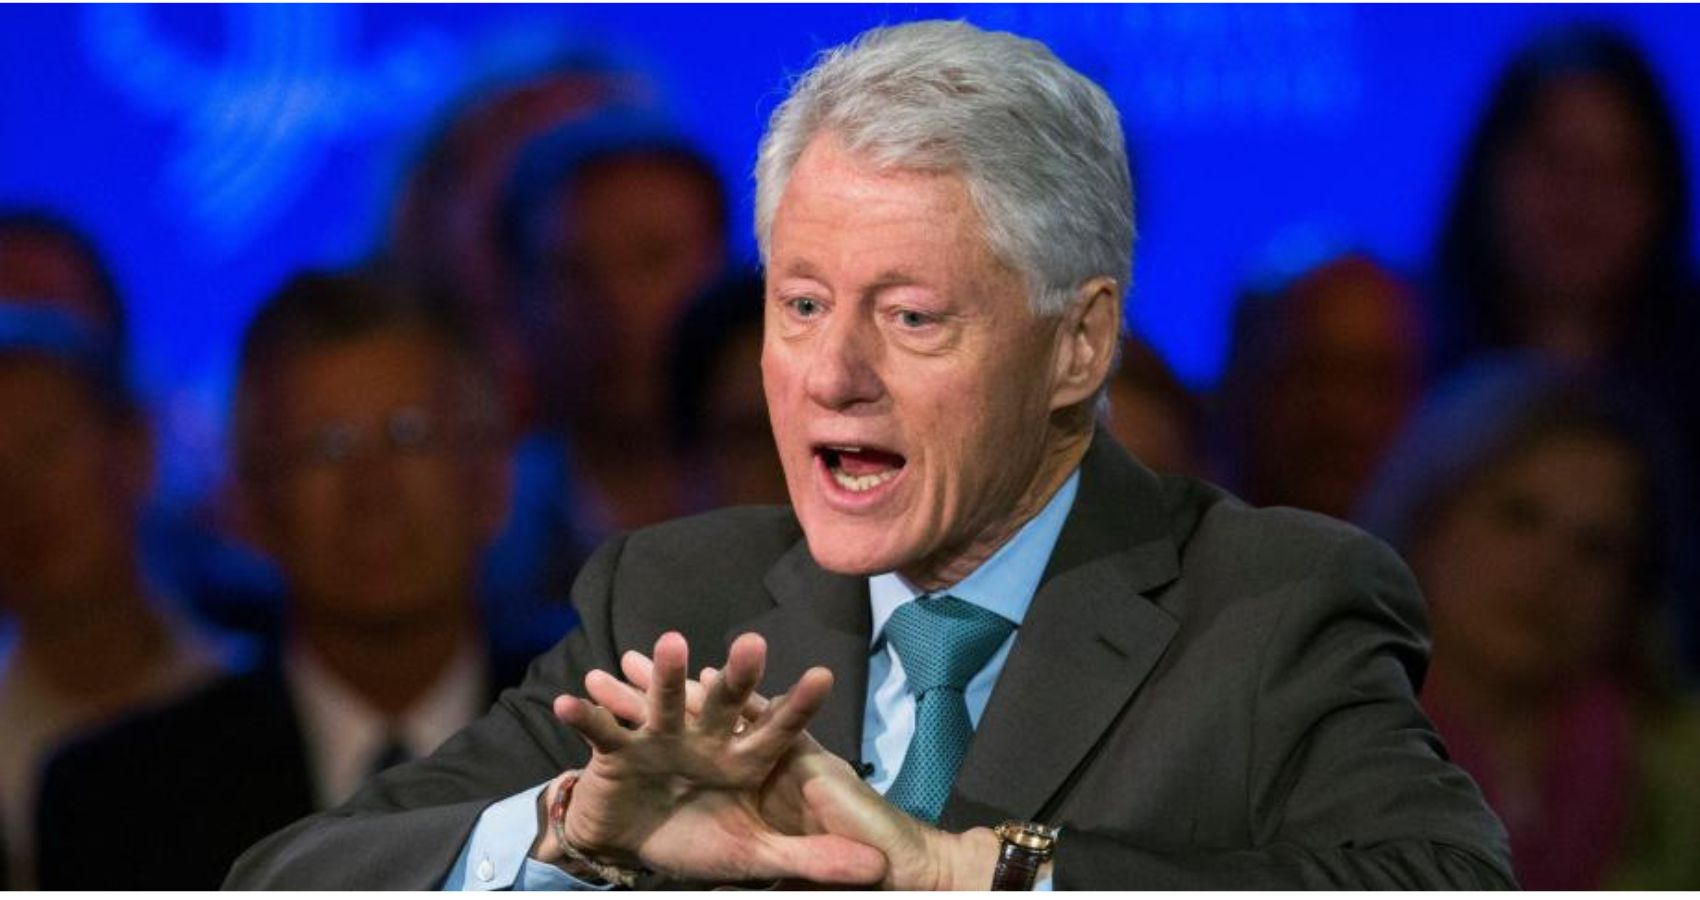 Bill Clinton Says Democrats Can Retain Congress, But Republicans Could Scare Swing Voters